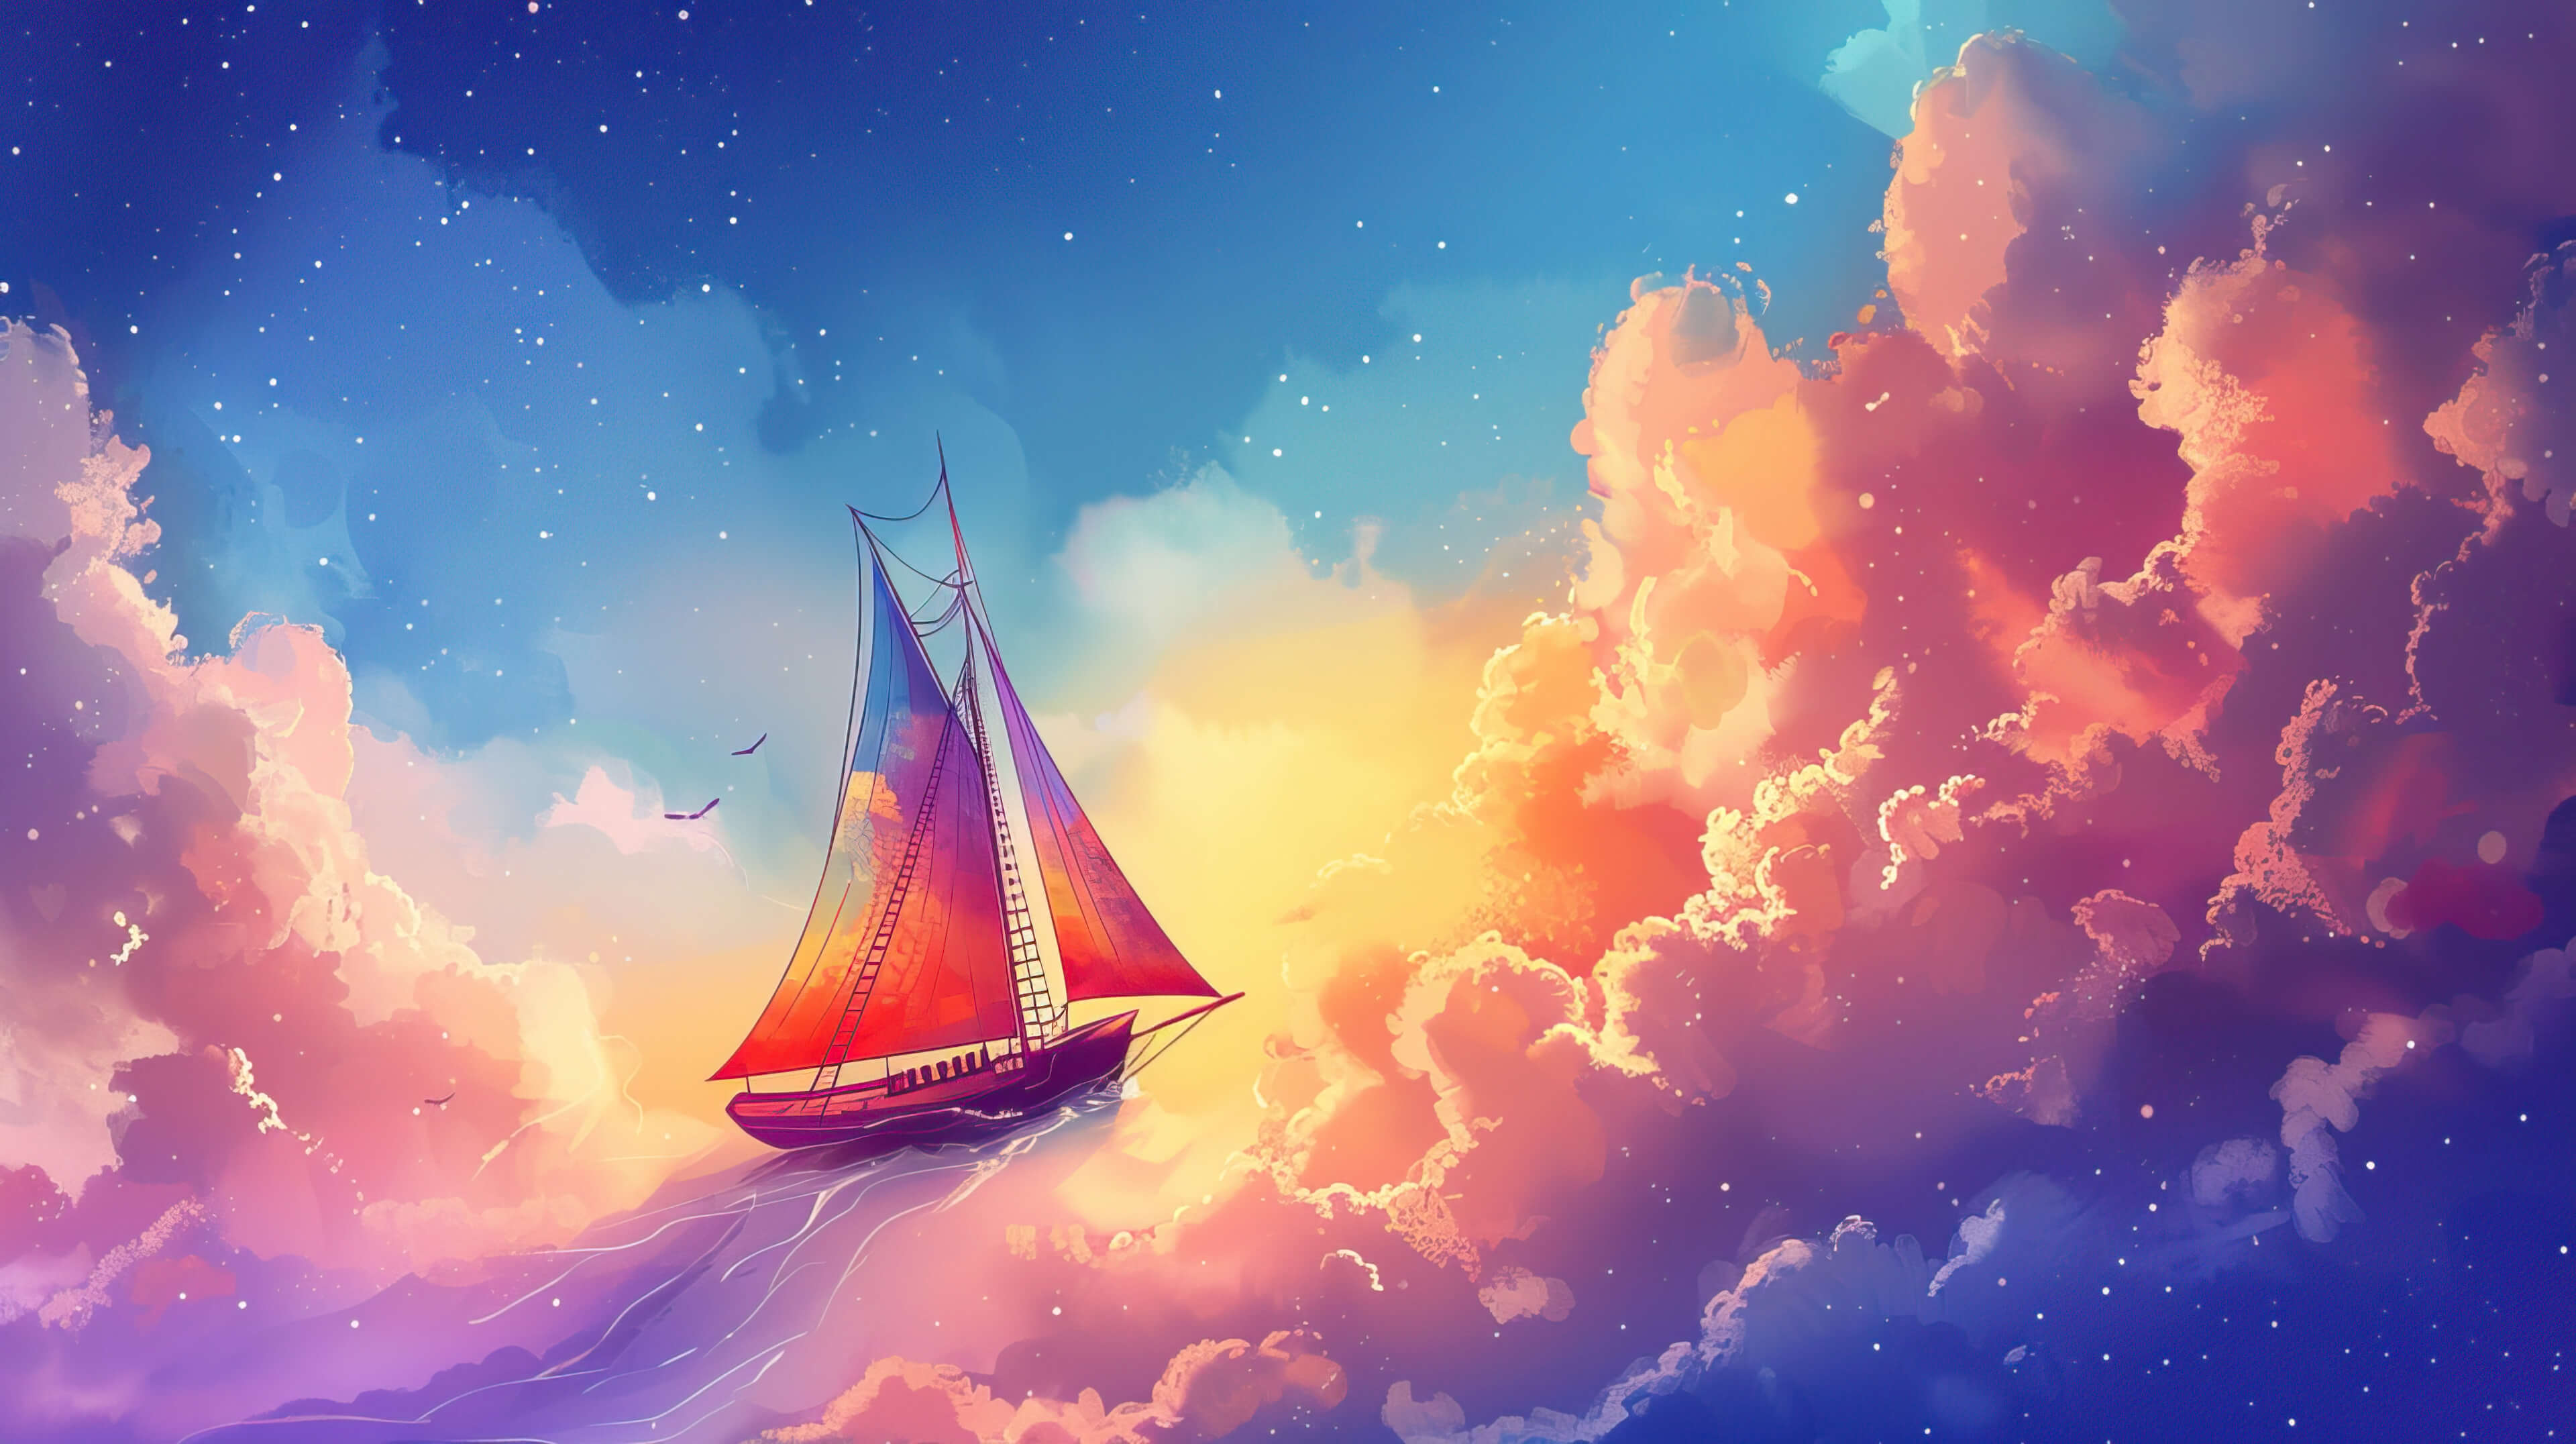 A fantastical wallpaper featuring a sailboat gliding through the sky amidst fluffy clouds its vibrant sails infusing a magical essence into the scene